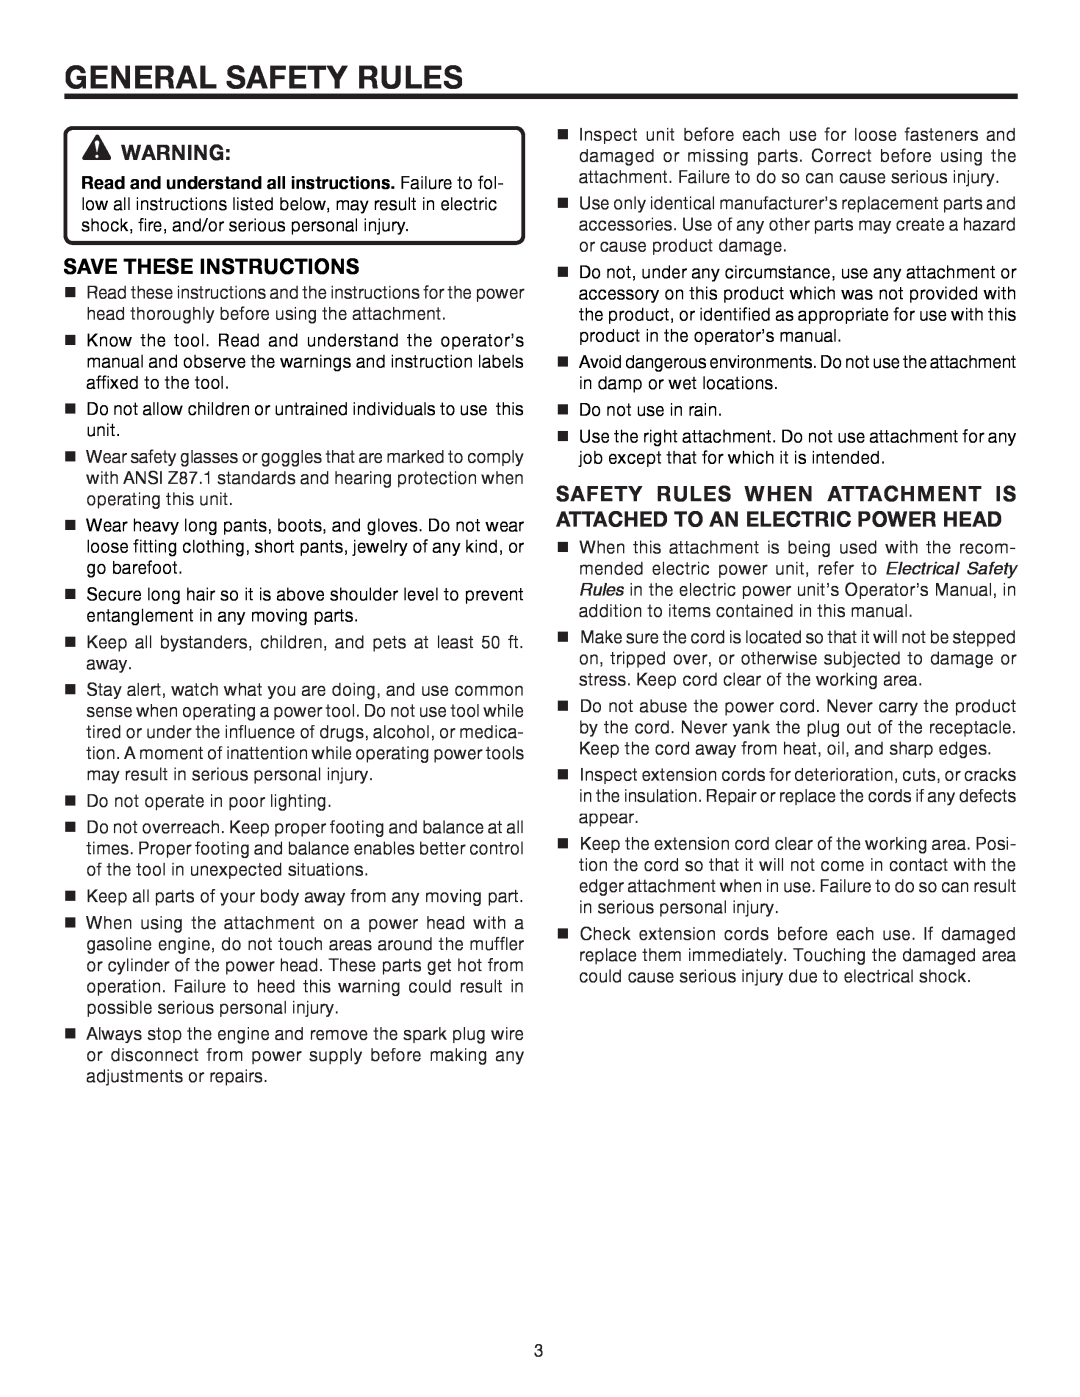 Ryobi UT15518F manual General Safety Rules, Save These Instructions 